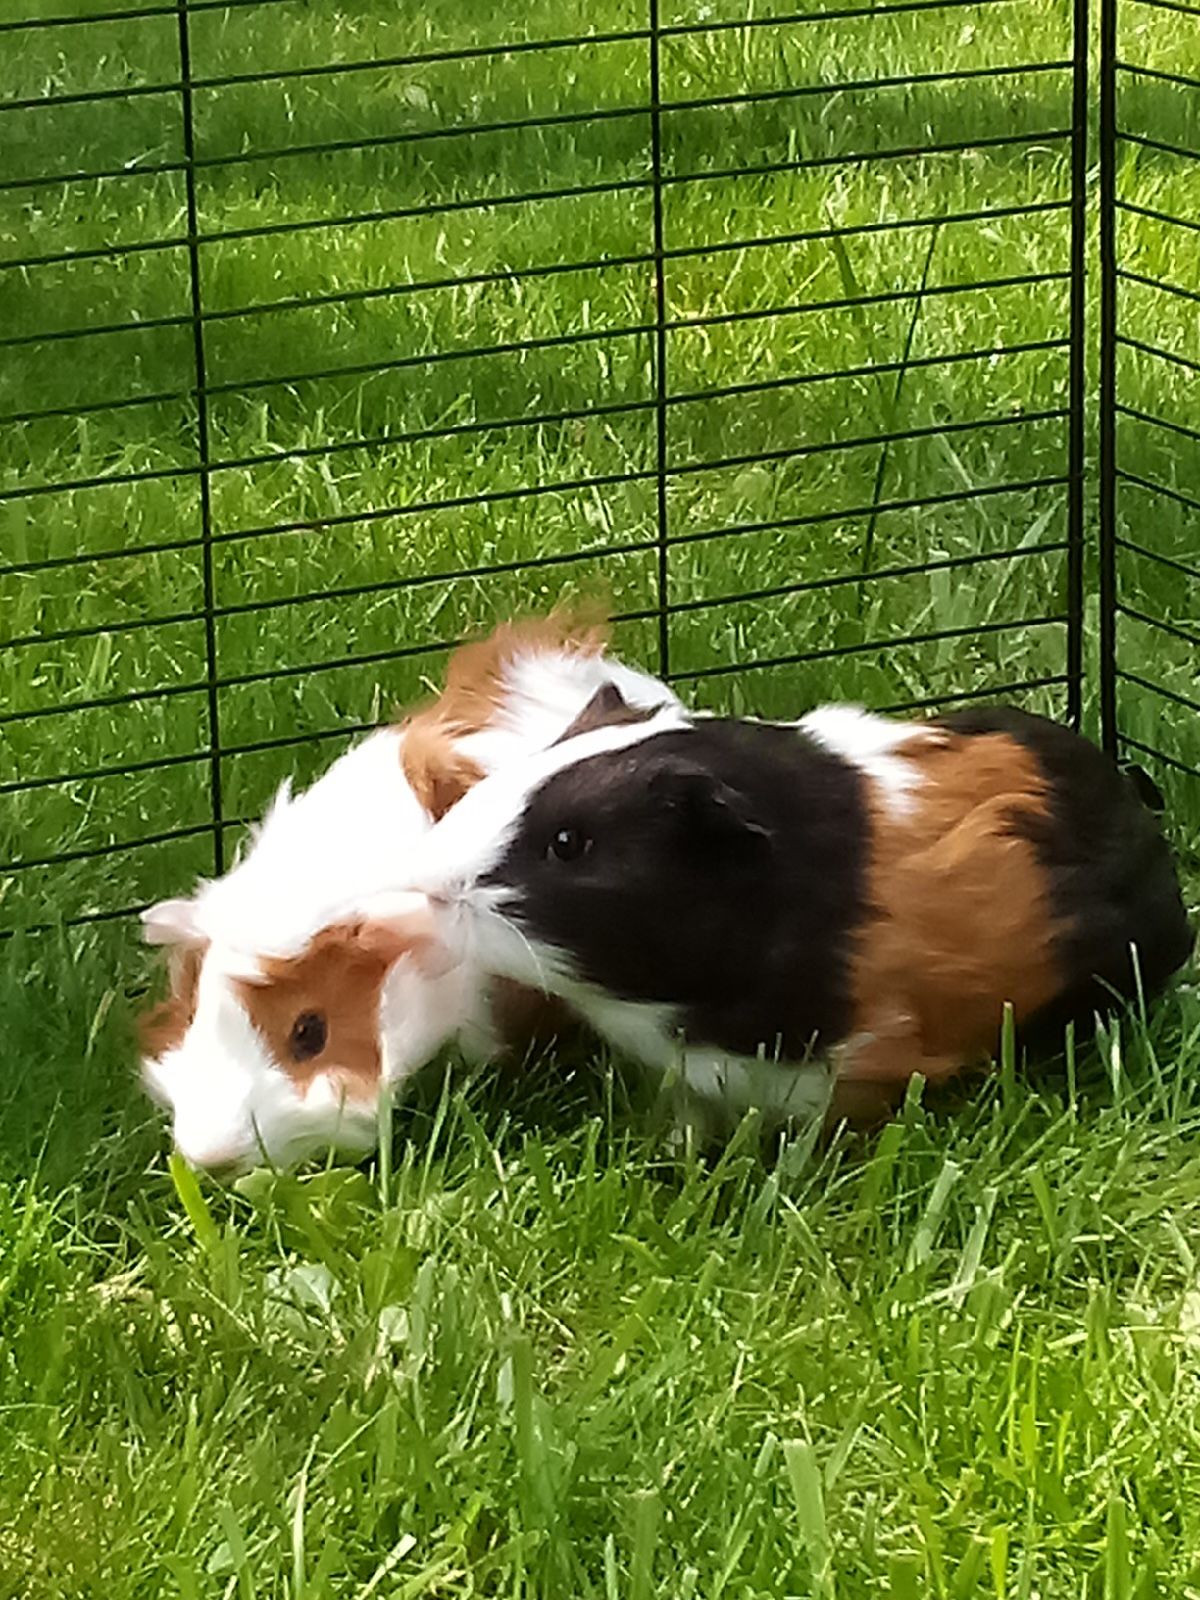 Pepper (left), and Dahlia. My new 2 month old piggies